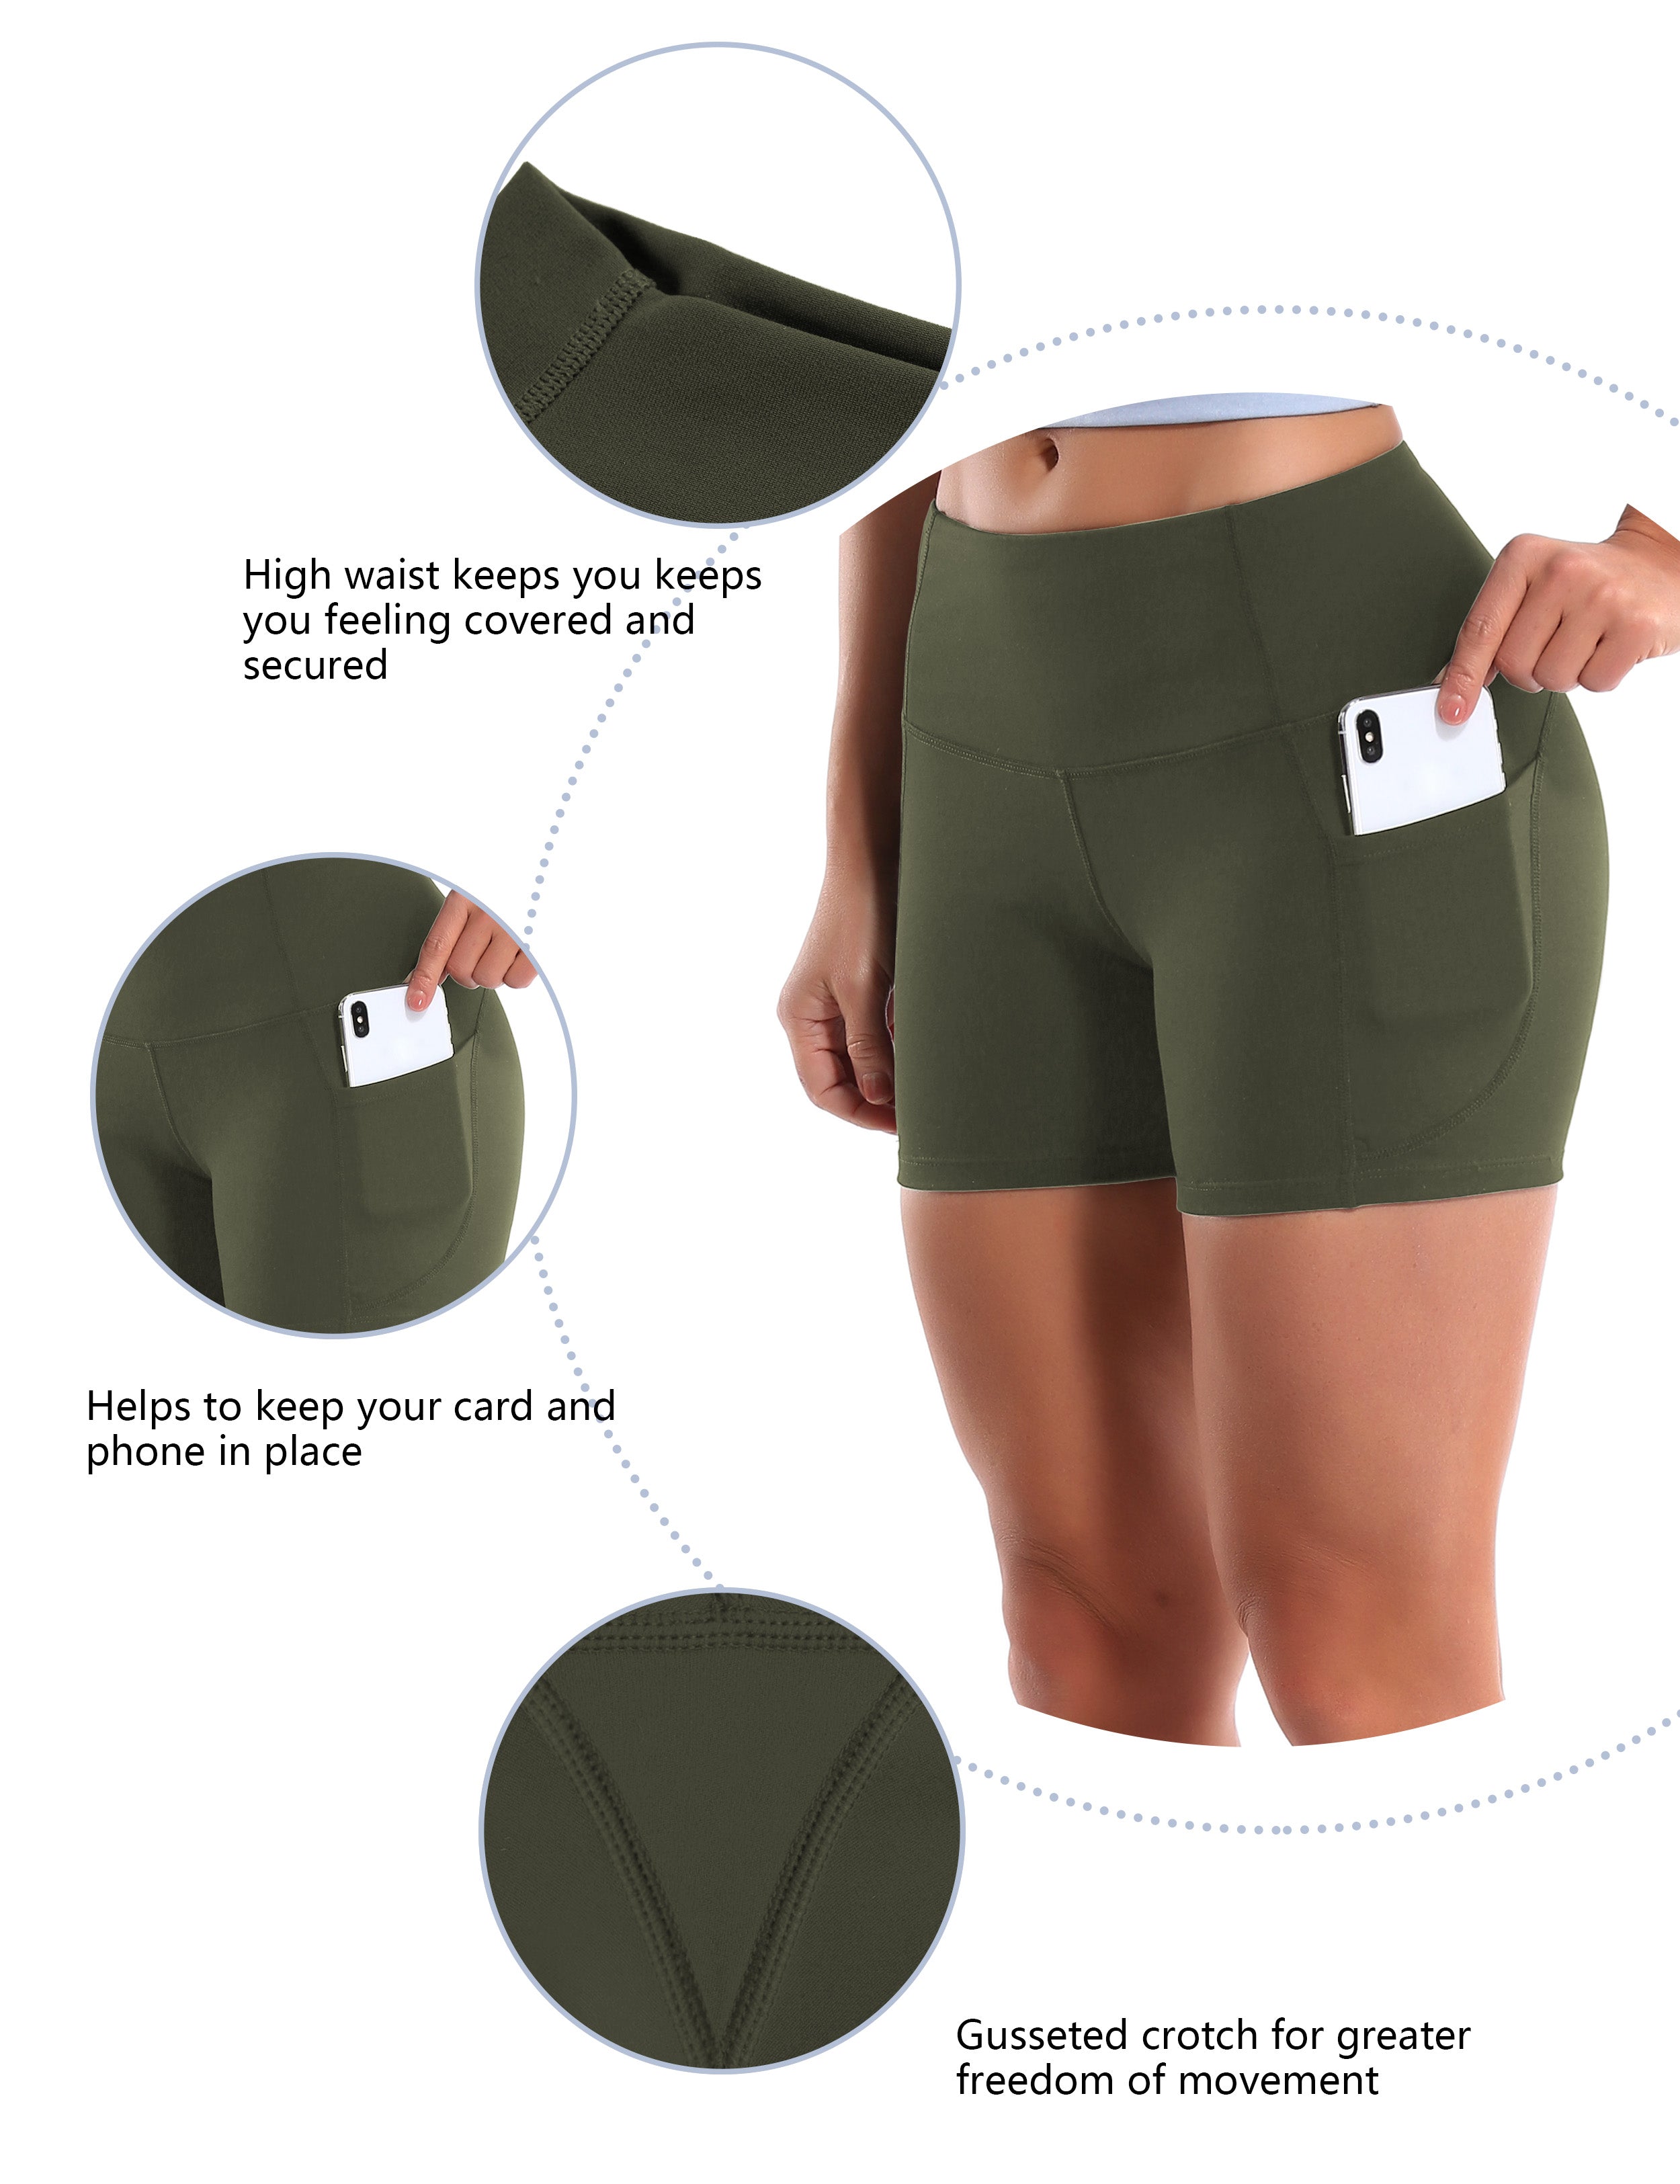 High Waist Side Pockets Running Shorts green Softest-ever fabric High elasticity 4-way stretch Fabric doesn't attract lint easily No see-through Moisture-wicking Machine wash 88% Nylon, 12% Spandex